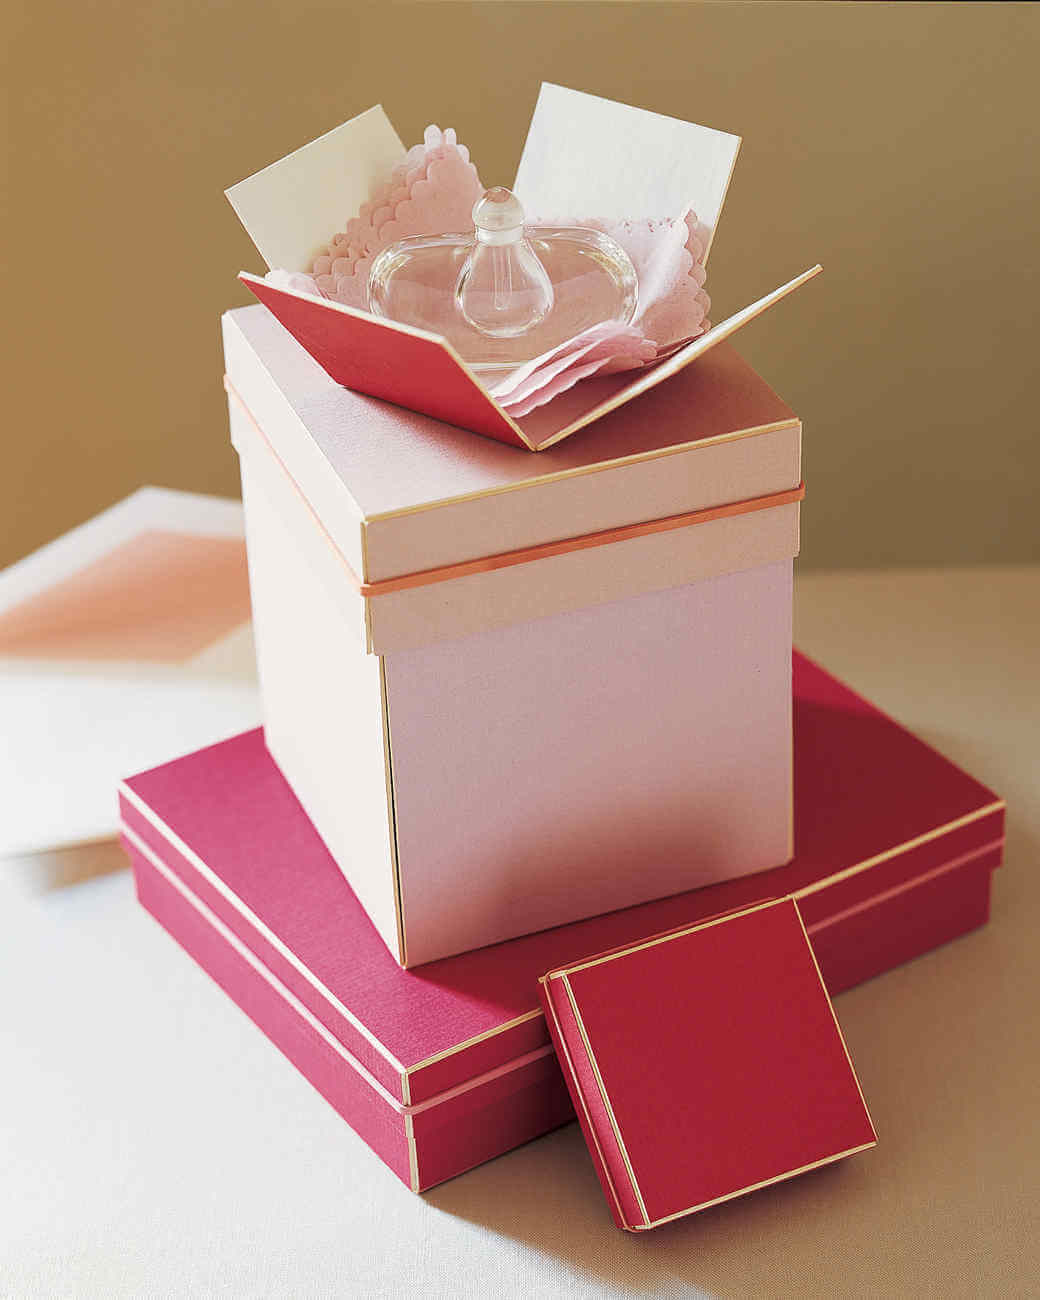 A pink box with a pink lid on top of it
